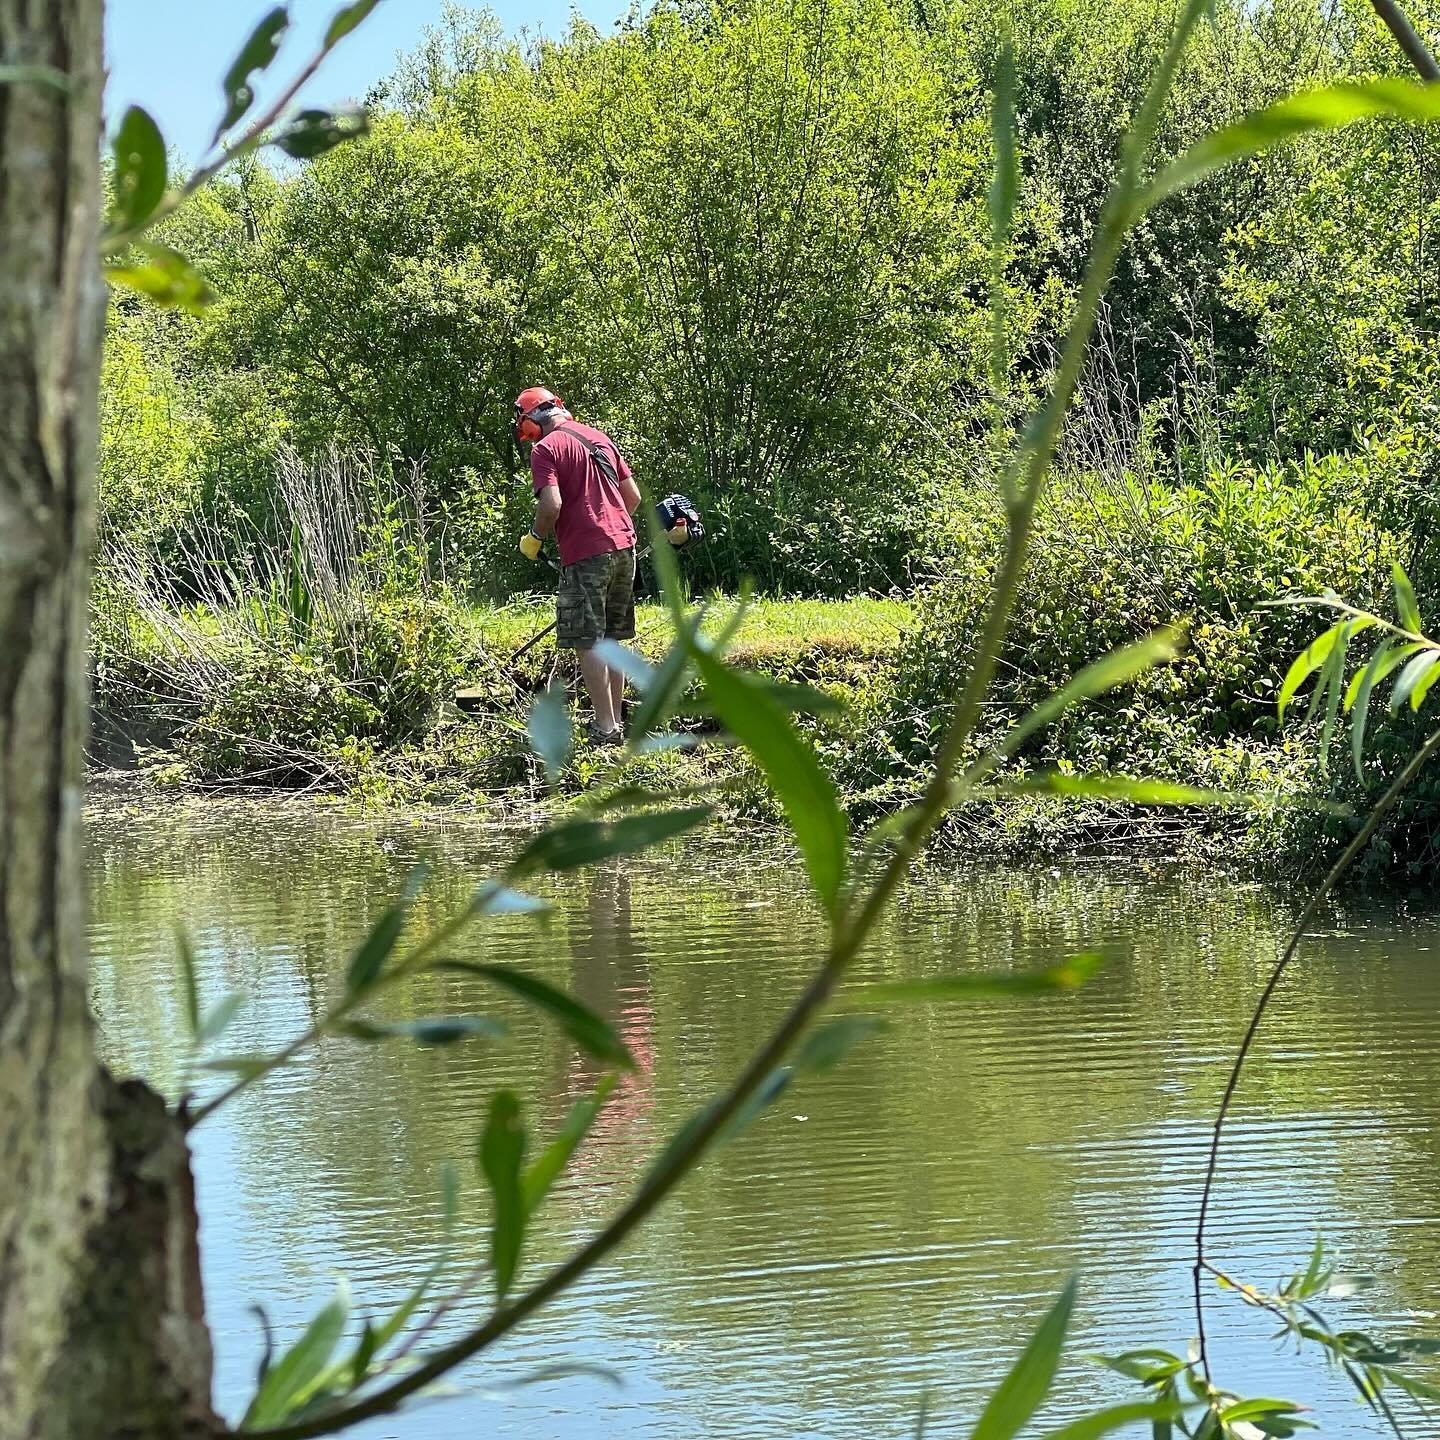 Getting the water training facilities ready. Thank you @sharkoftheinsectworld for helping with the brush cutting #retrievertraining #gundogtraining #waterretrieve #retriever #labrador #gundogs #townandcountrydogtraining #accreditedpetgundoginstructor